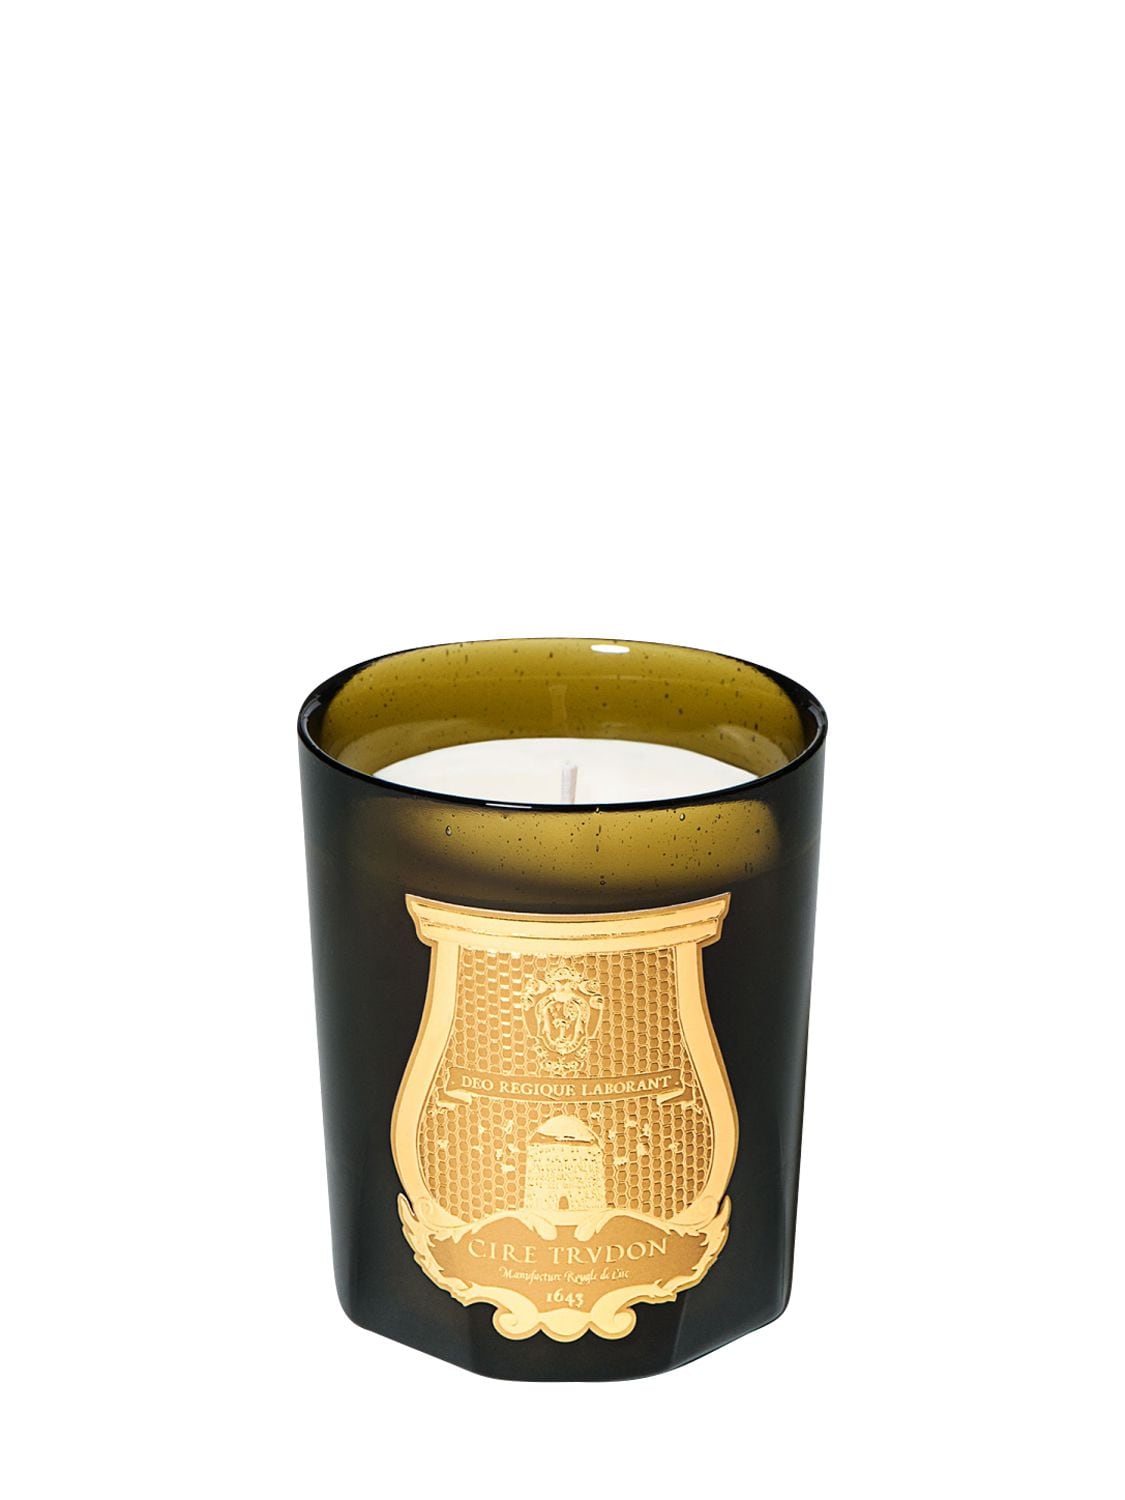 Trudon Cyrnos Bougie Classic Scented Candle In Green,gold